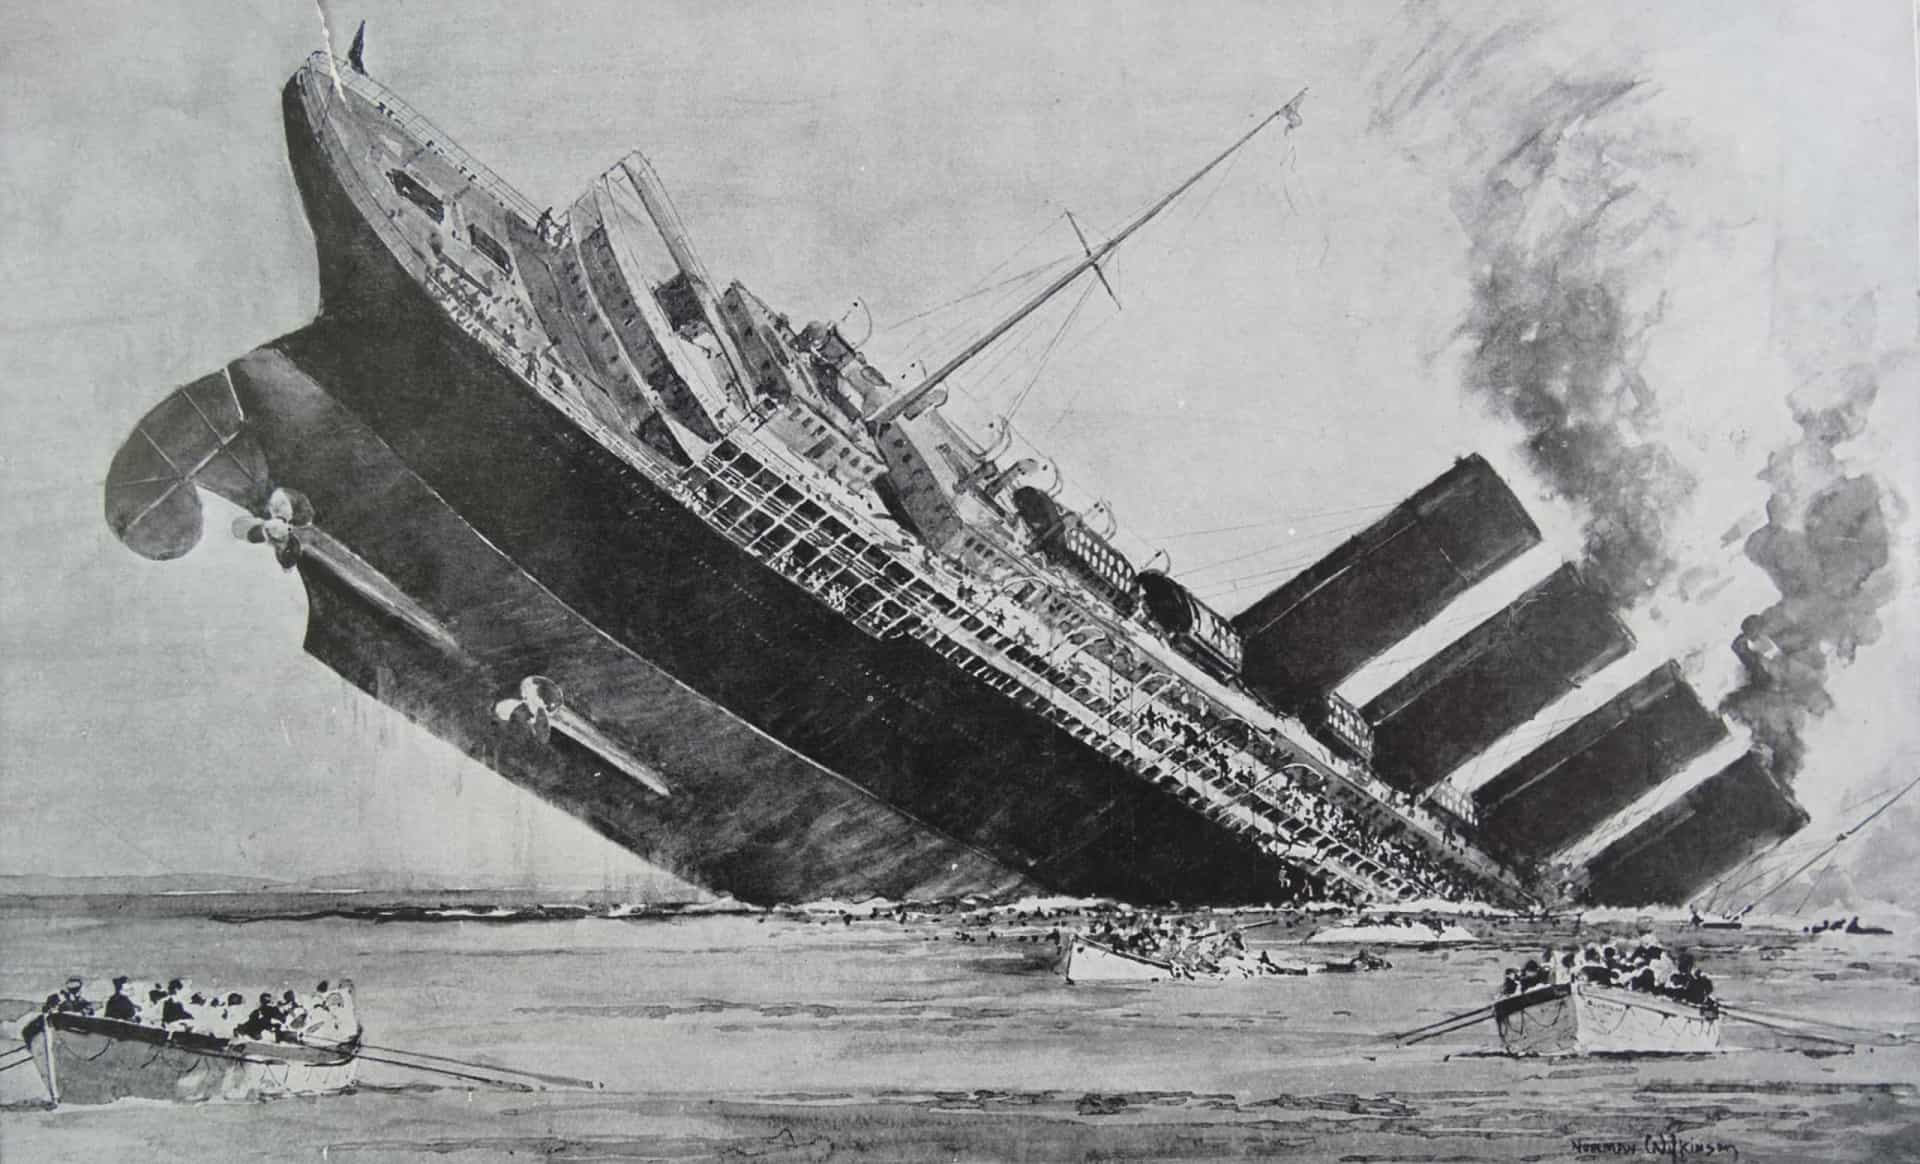 <p>The most high-profile sinking of a passenger liner during the First World War was that of the Cunard liner RMS <em>Lusitania</em>. On May 7, 1915, the vessel was hit by a single torpedo, fired from the German submarine <em>U-20</em>. It took less than 20 minutes for the Atlantic to claim the ship, with just 761 people surviving out of the 1,266 passengers and 696 crew aboard, with 123 of the casualties being American citizens. <em>Lusitania</em> had not been drafted into the war effort and was following its regular route between Liverpool and New York City. The casualties were all civilians. Its loss contributed to the American entry into the conflict two years later.</p><p>You may also like:<a href="https://www.starsinsider.com/n/450359?utm_source=msn.com&utm_medium=display&utm_campaign=referral_description&utm_content=597926en-za"> The royal weddings that changed European history</a></p>